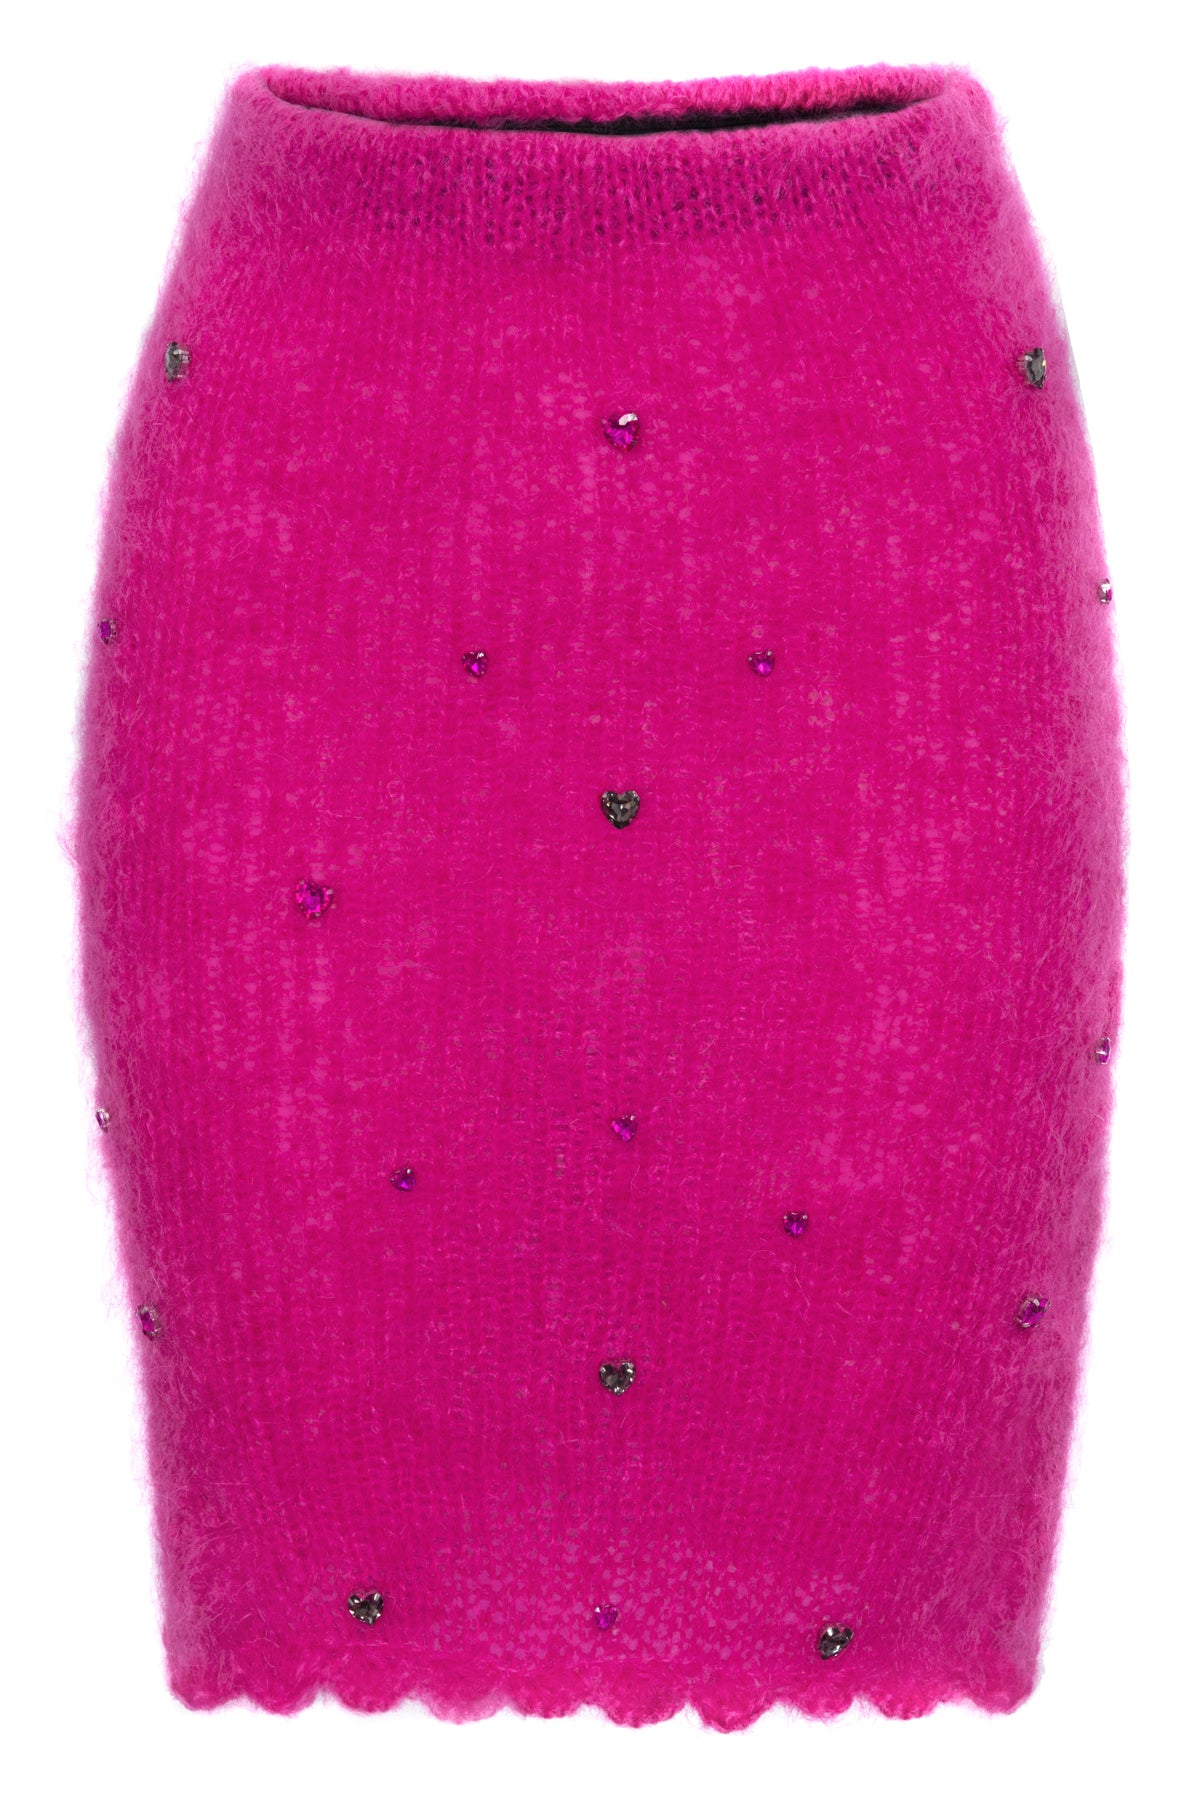 Paris Pink Hand-Knit Mohair Skirt Embellished with Heart Crystals- Made to Order